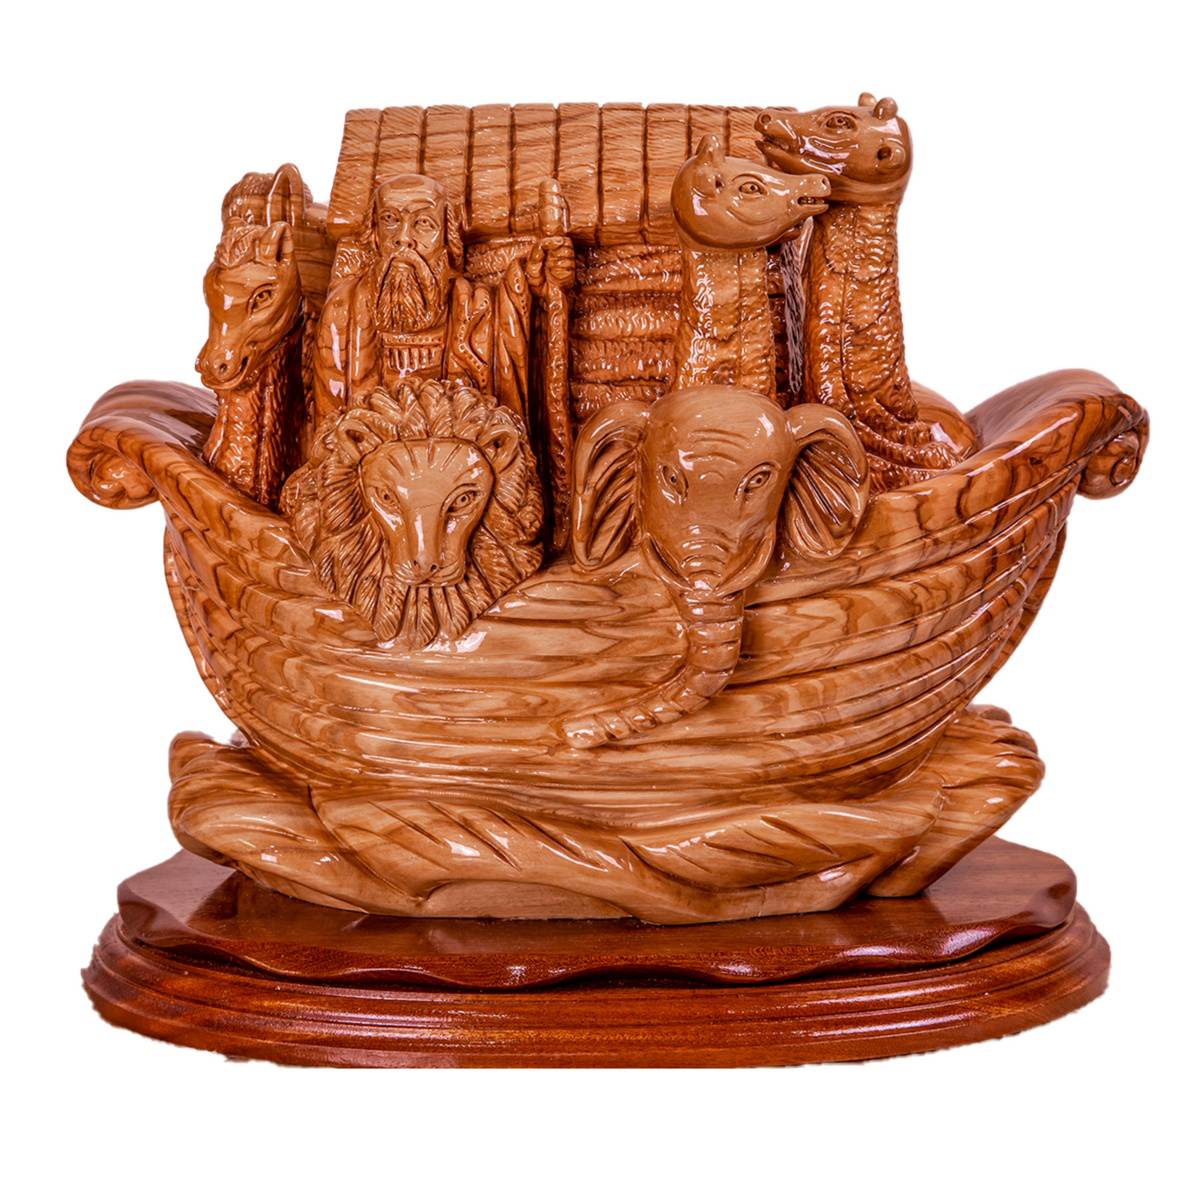 Noah's Ark, Cathedral Quality, Size: 12.6"/32 cm Height - Blest Art, Inc. 